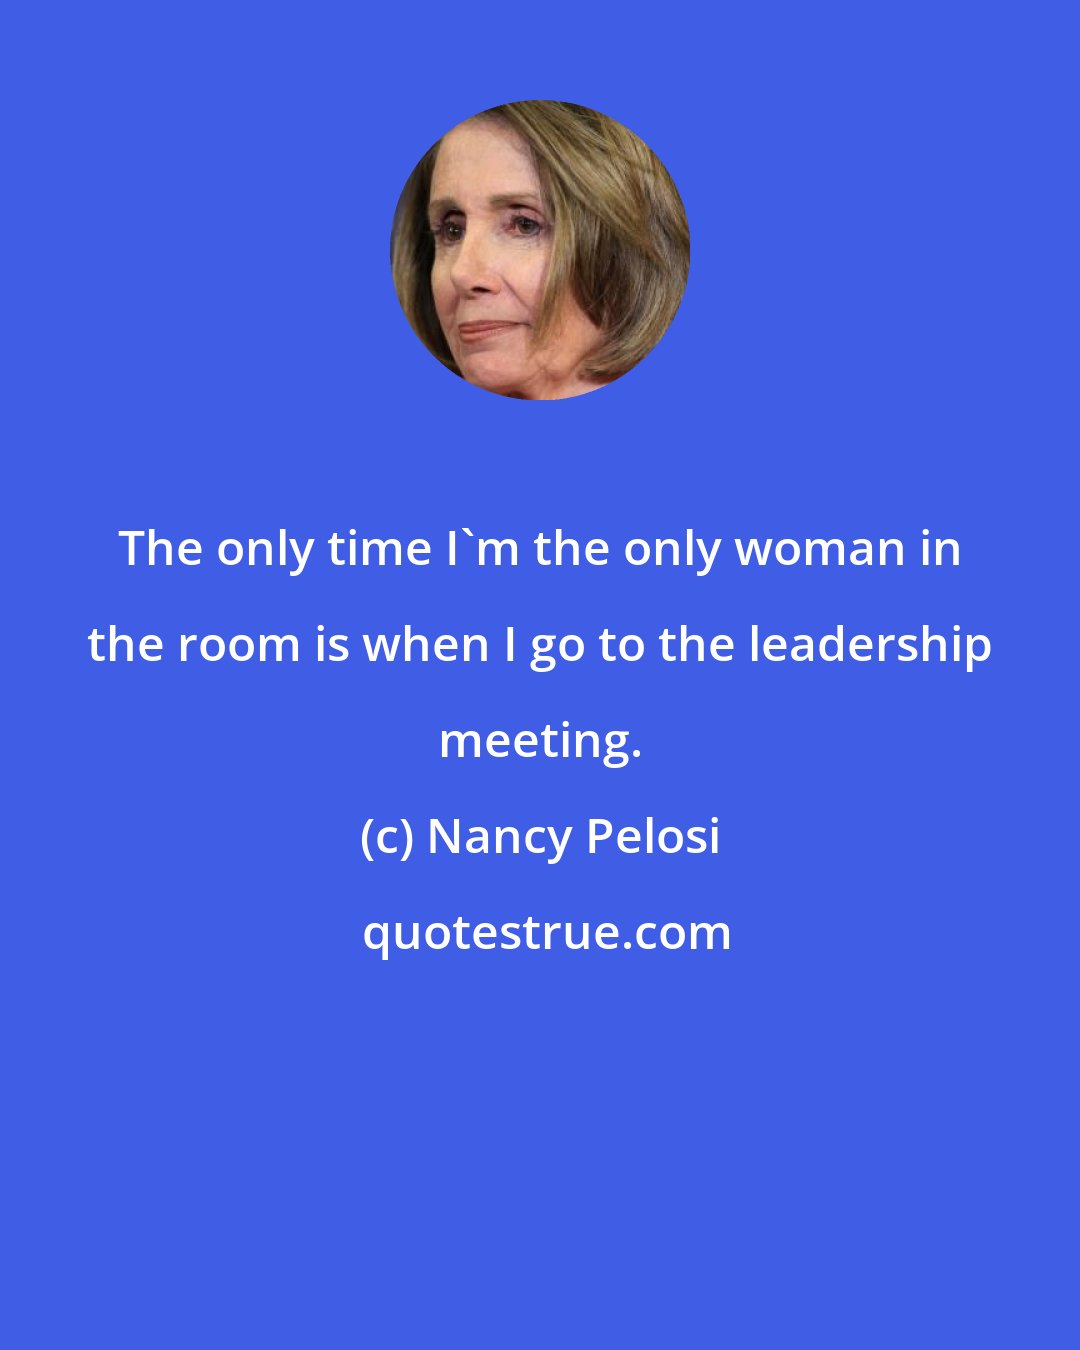 Nancy Pelosi: The only time I'm the only woman in the room is when I go to the leadership meeting.